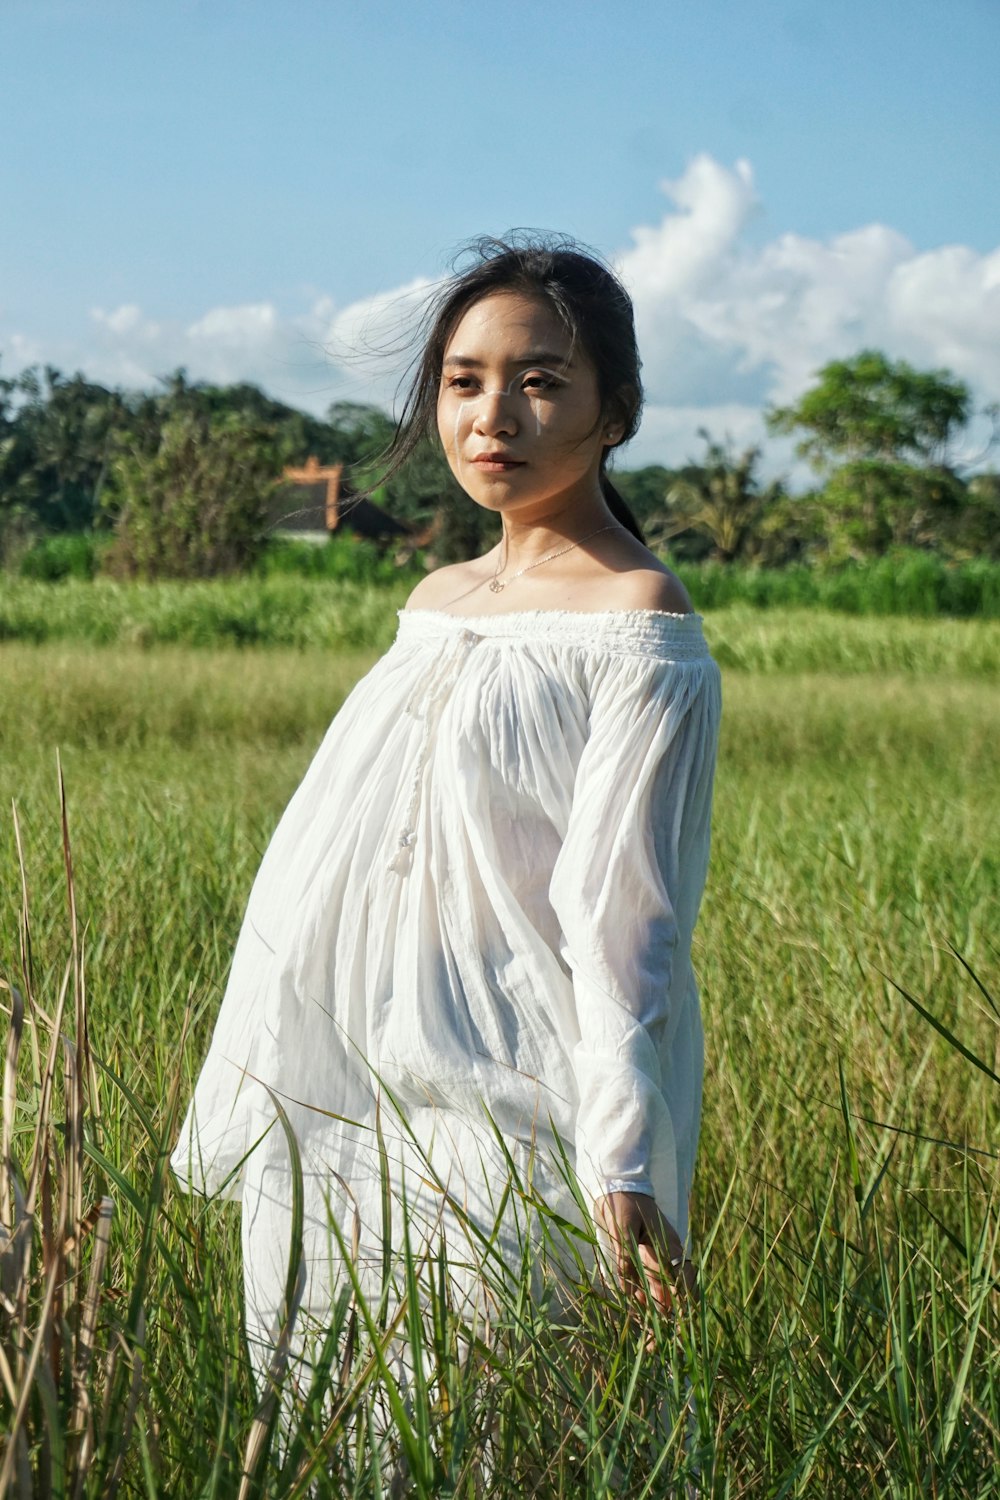 a person in a white dress standing in a field of tall grass